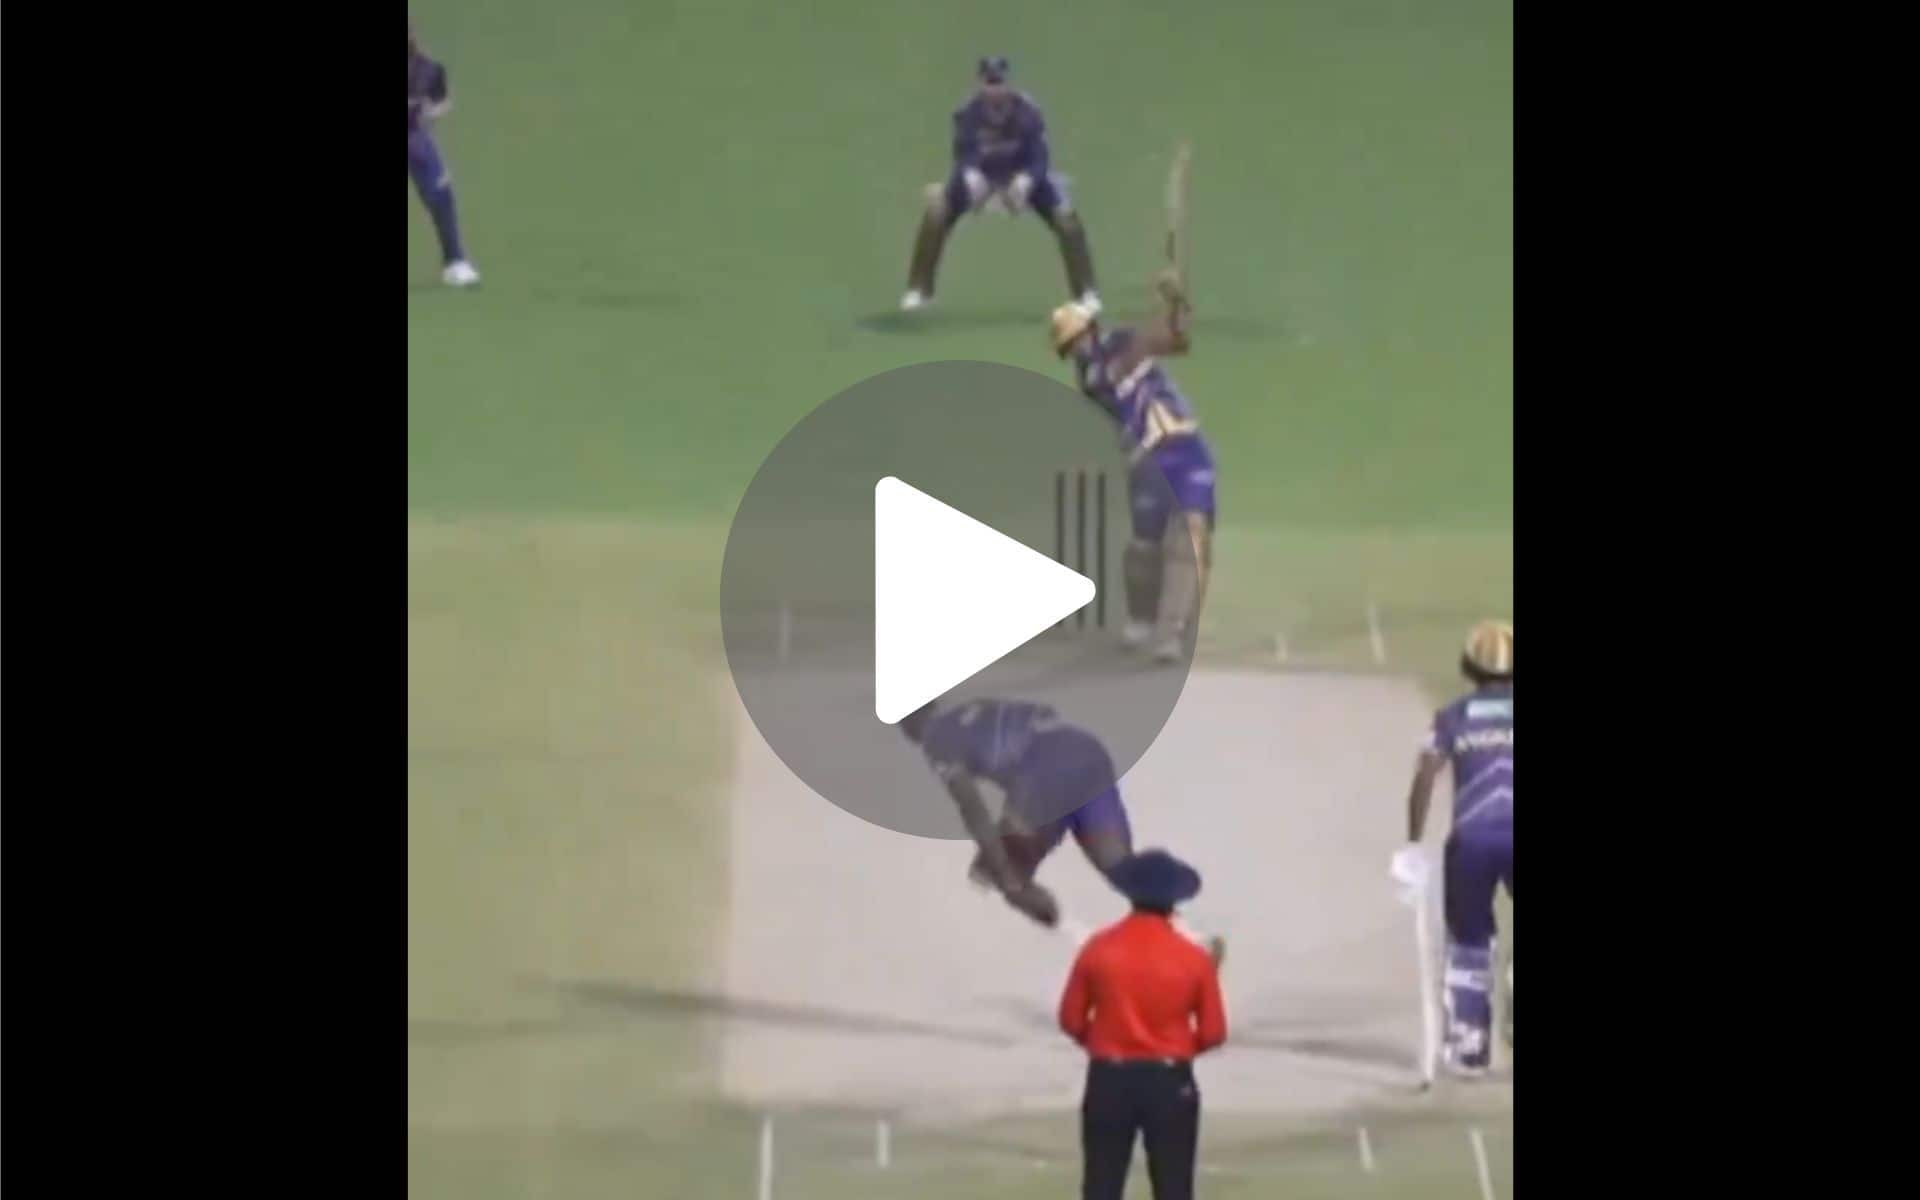 [Watch] Manish Pandey's Massive Six Off Andre Russell In KKR Practice Game